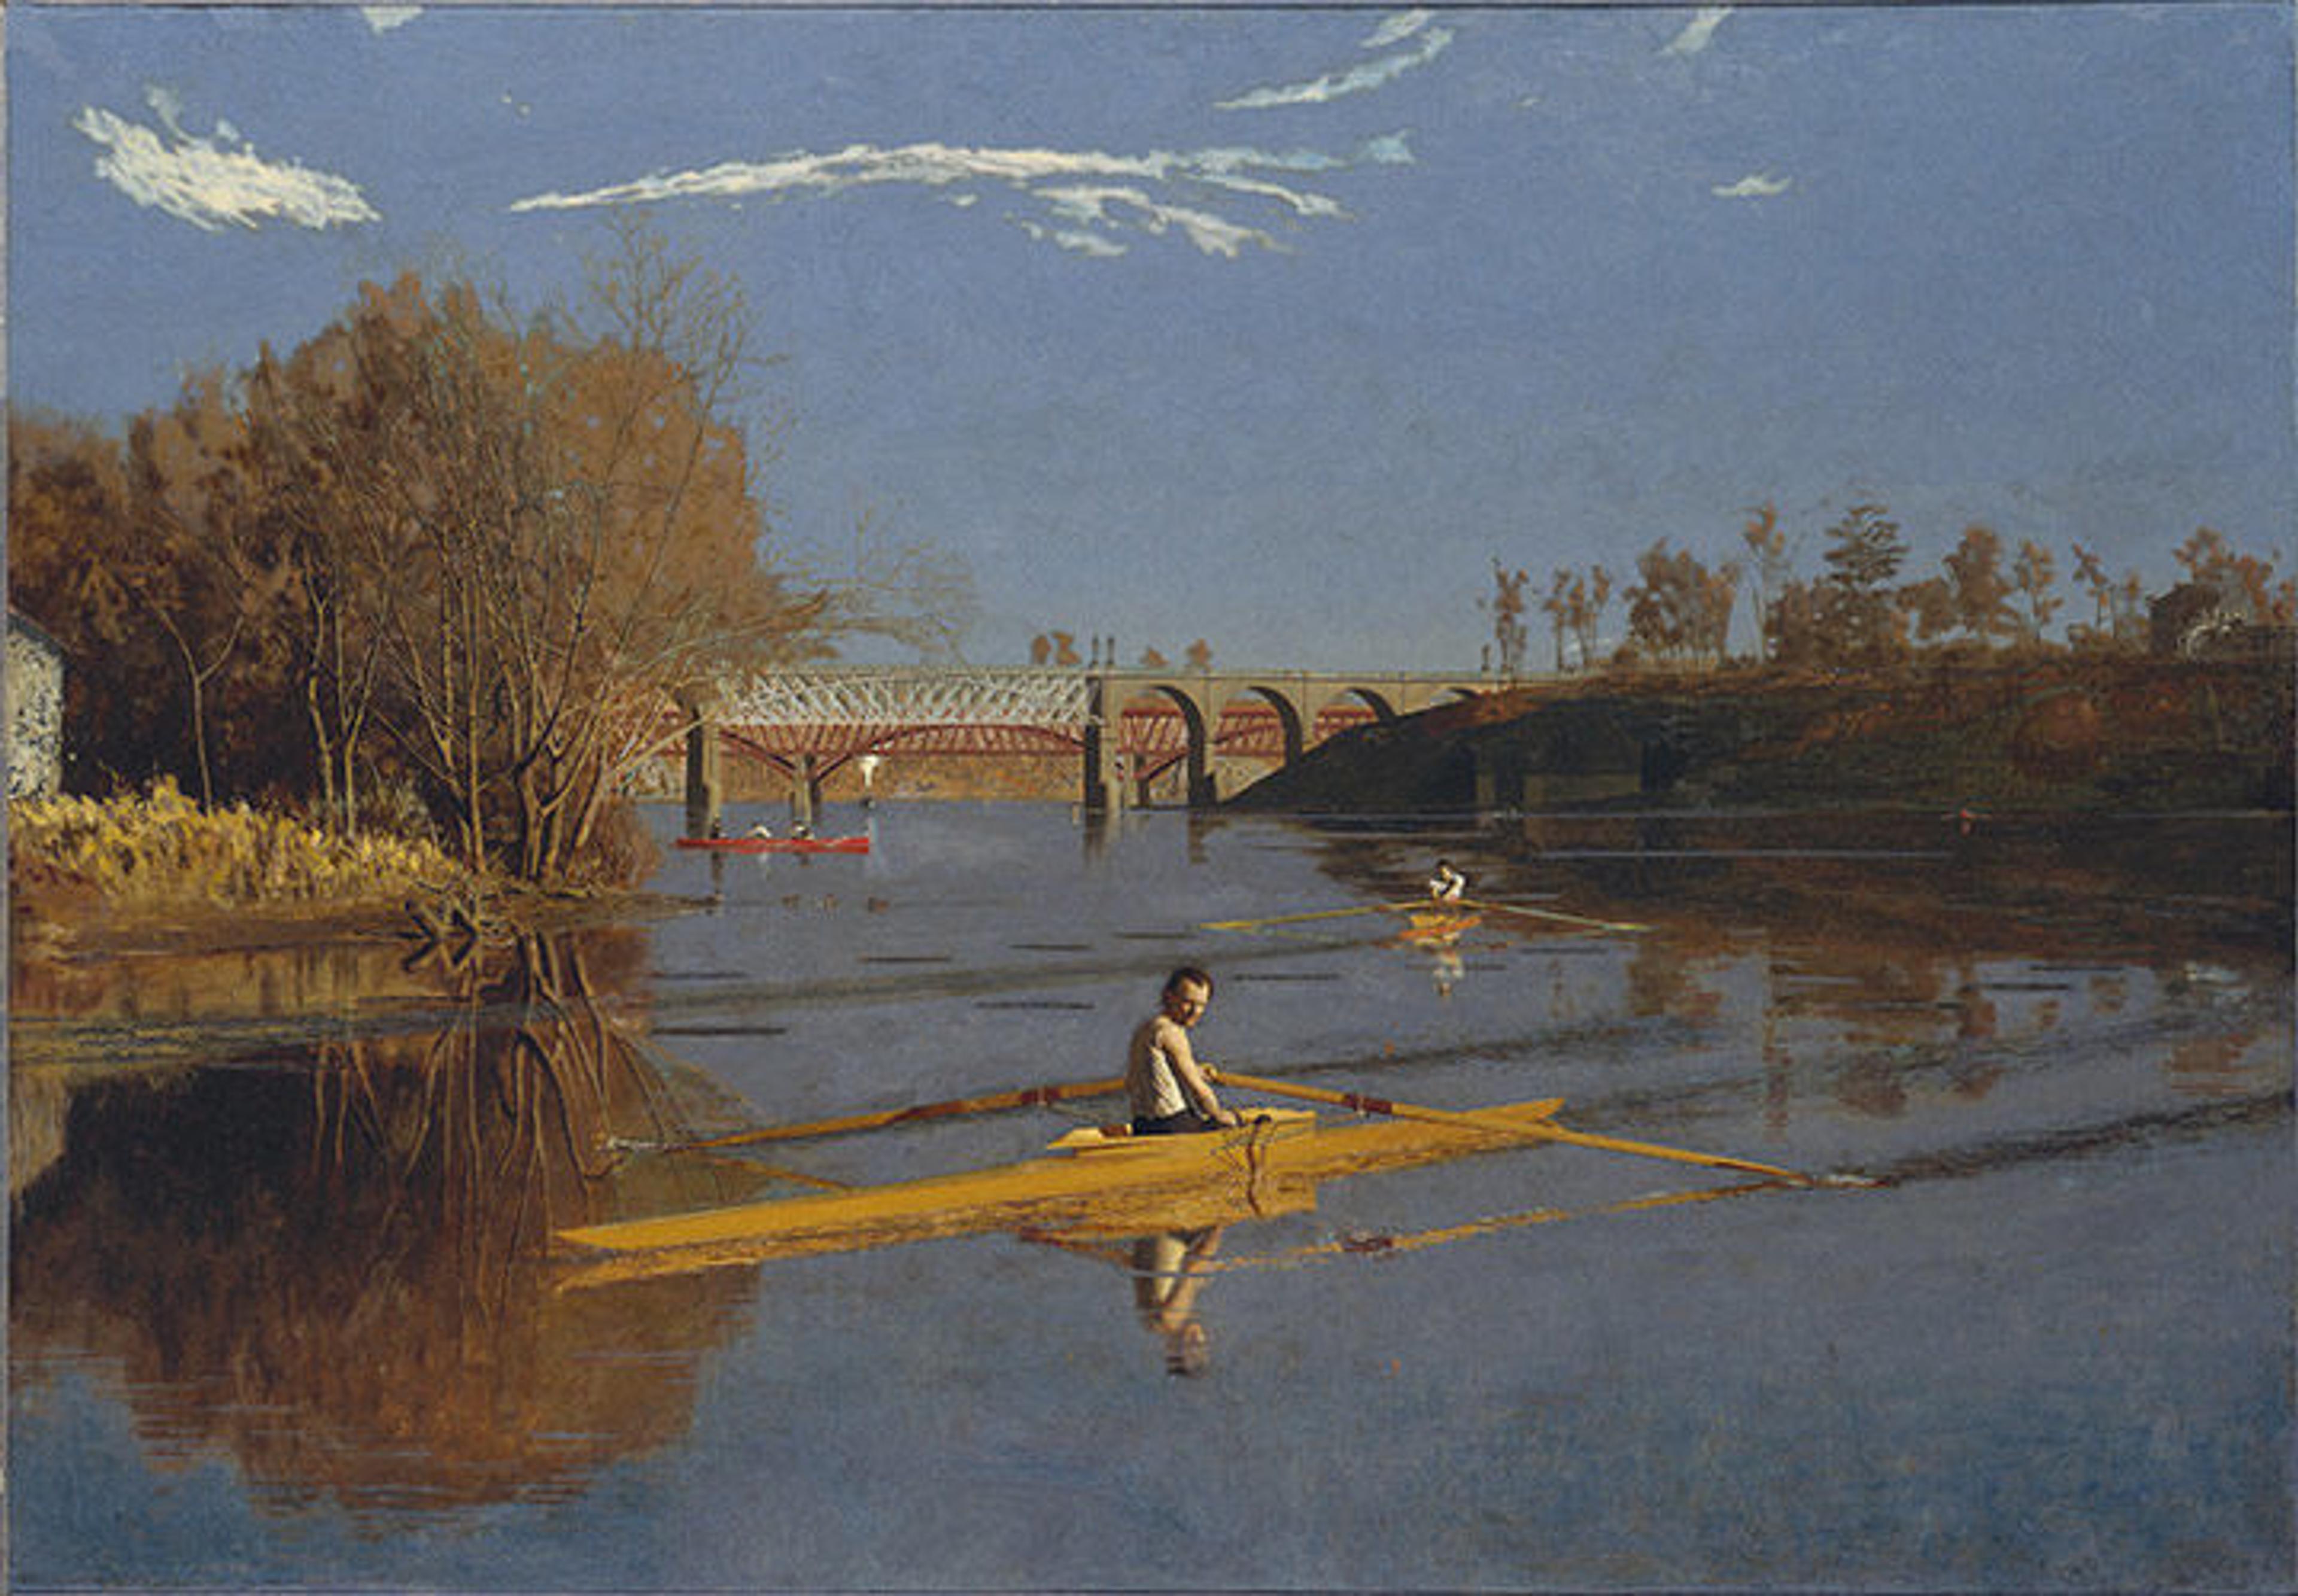 Painting by Thomas Eakins of man in a skiff on a blue river